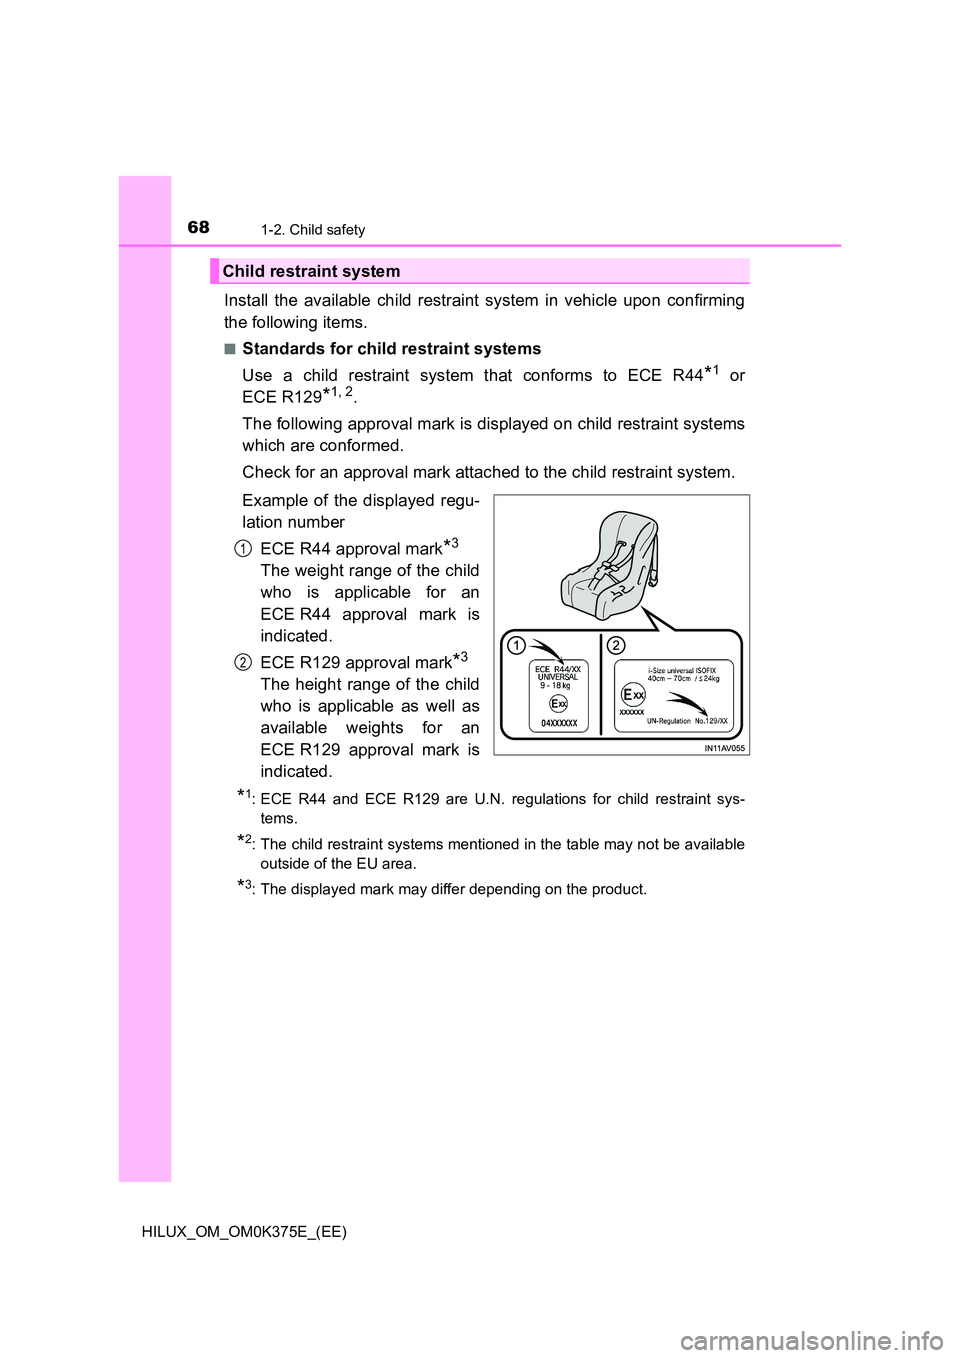 TOYOTA HILUX 2018  Owners Manual 681-2. Child safety
HILUX_OM_OM0K375E_(EE)
Install the available child restraint system in vehicle upon confirming 
the following items.
■Standards for child restraint systems 
Use a child restraint